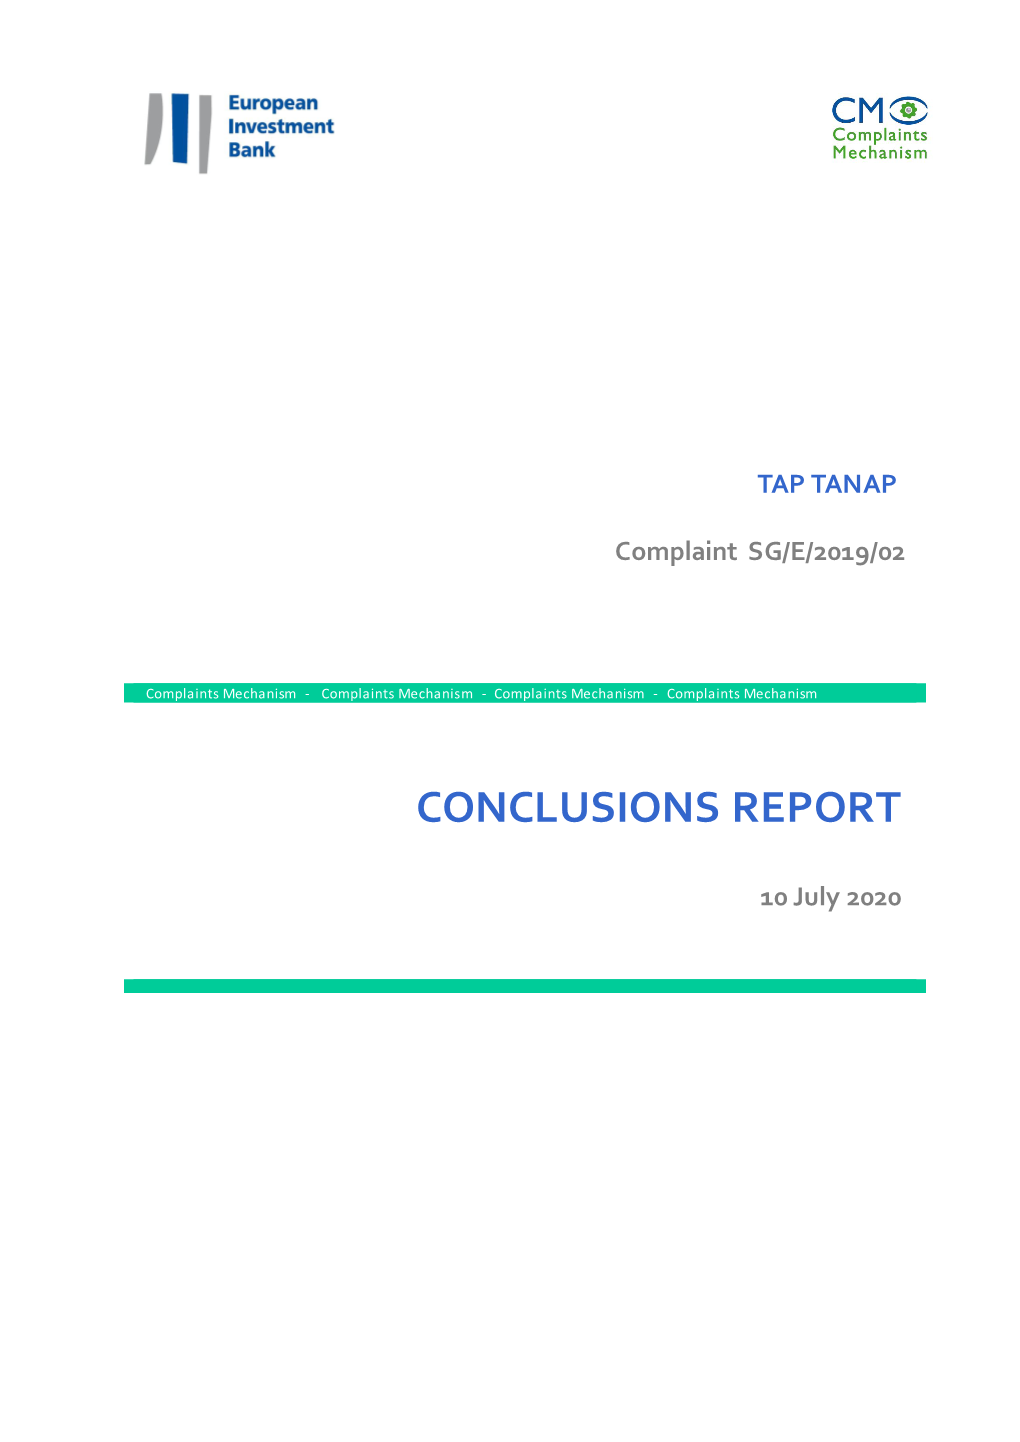 Conclusions Report